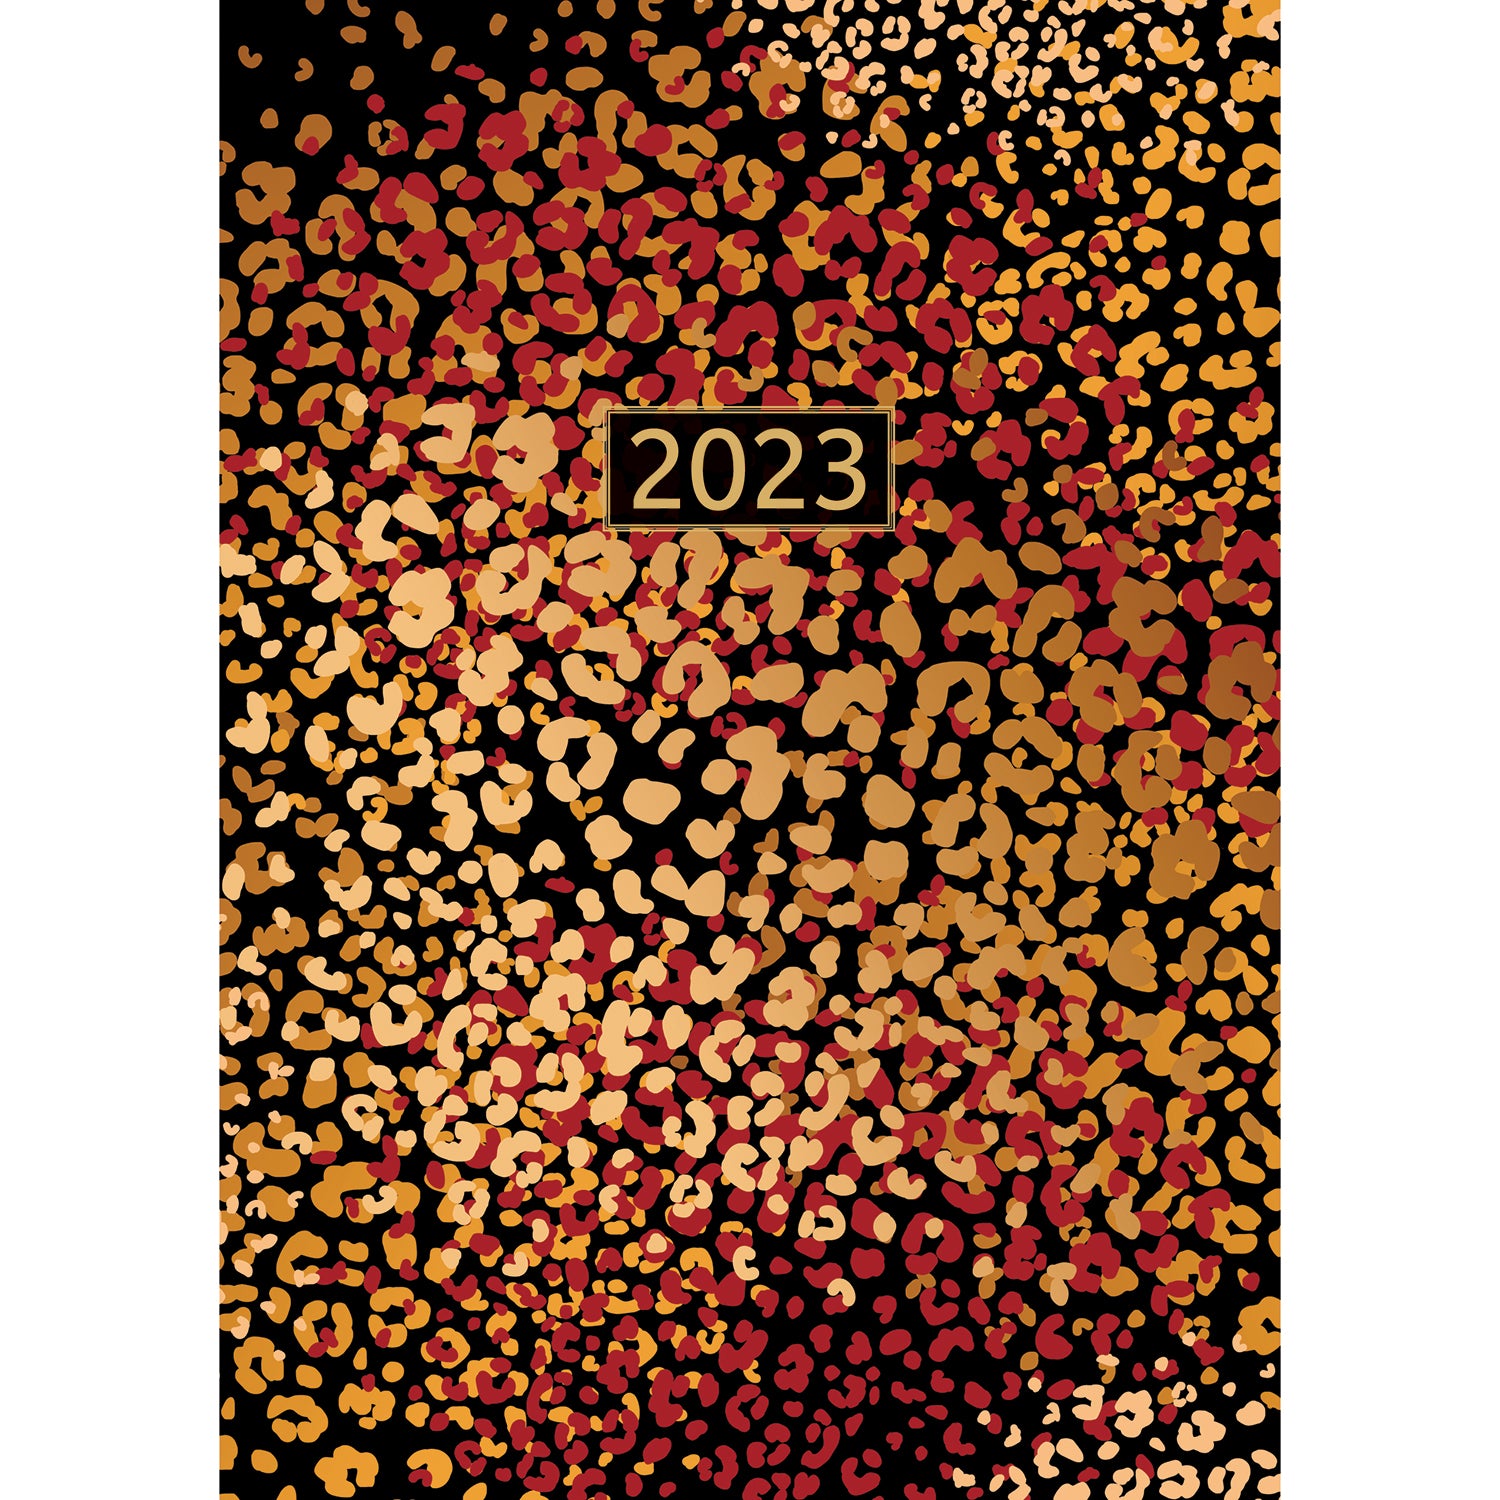 Leopard 2023 A5 Padded Cover Diary Premium Planner Book Christmas New Year Gift - Zmart Australia